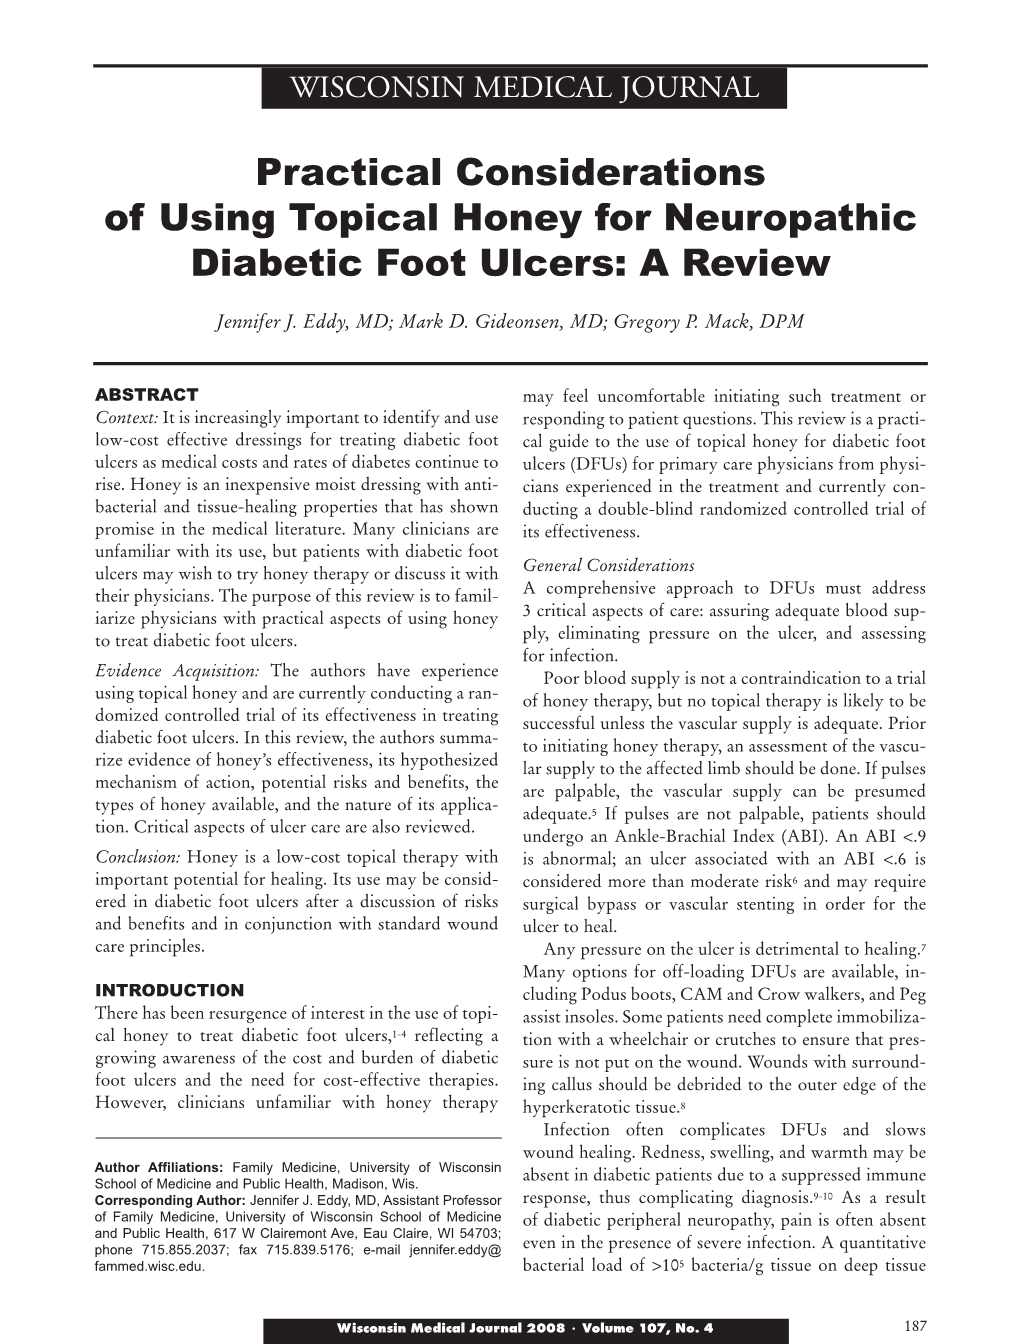 Practical Considerations of Using Topical Honey for Neuropathic Diabetic Foot Ulcers: a Review